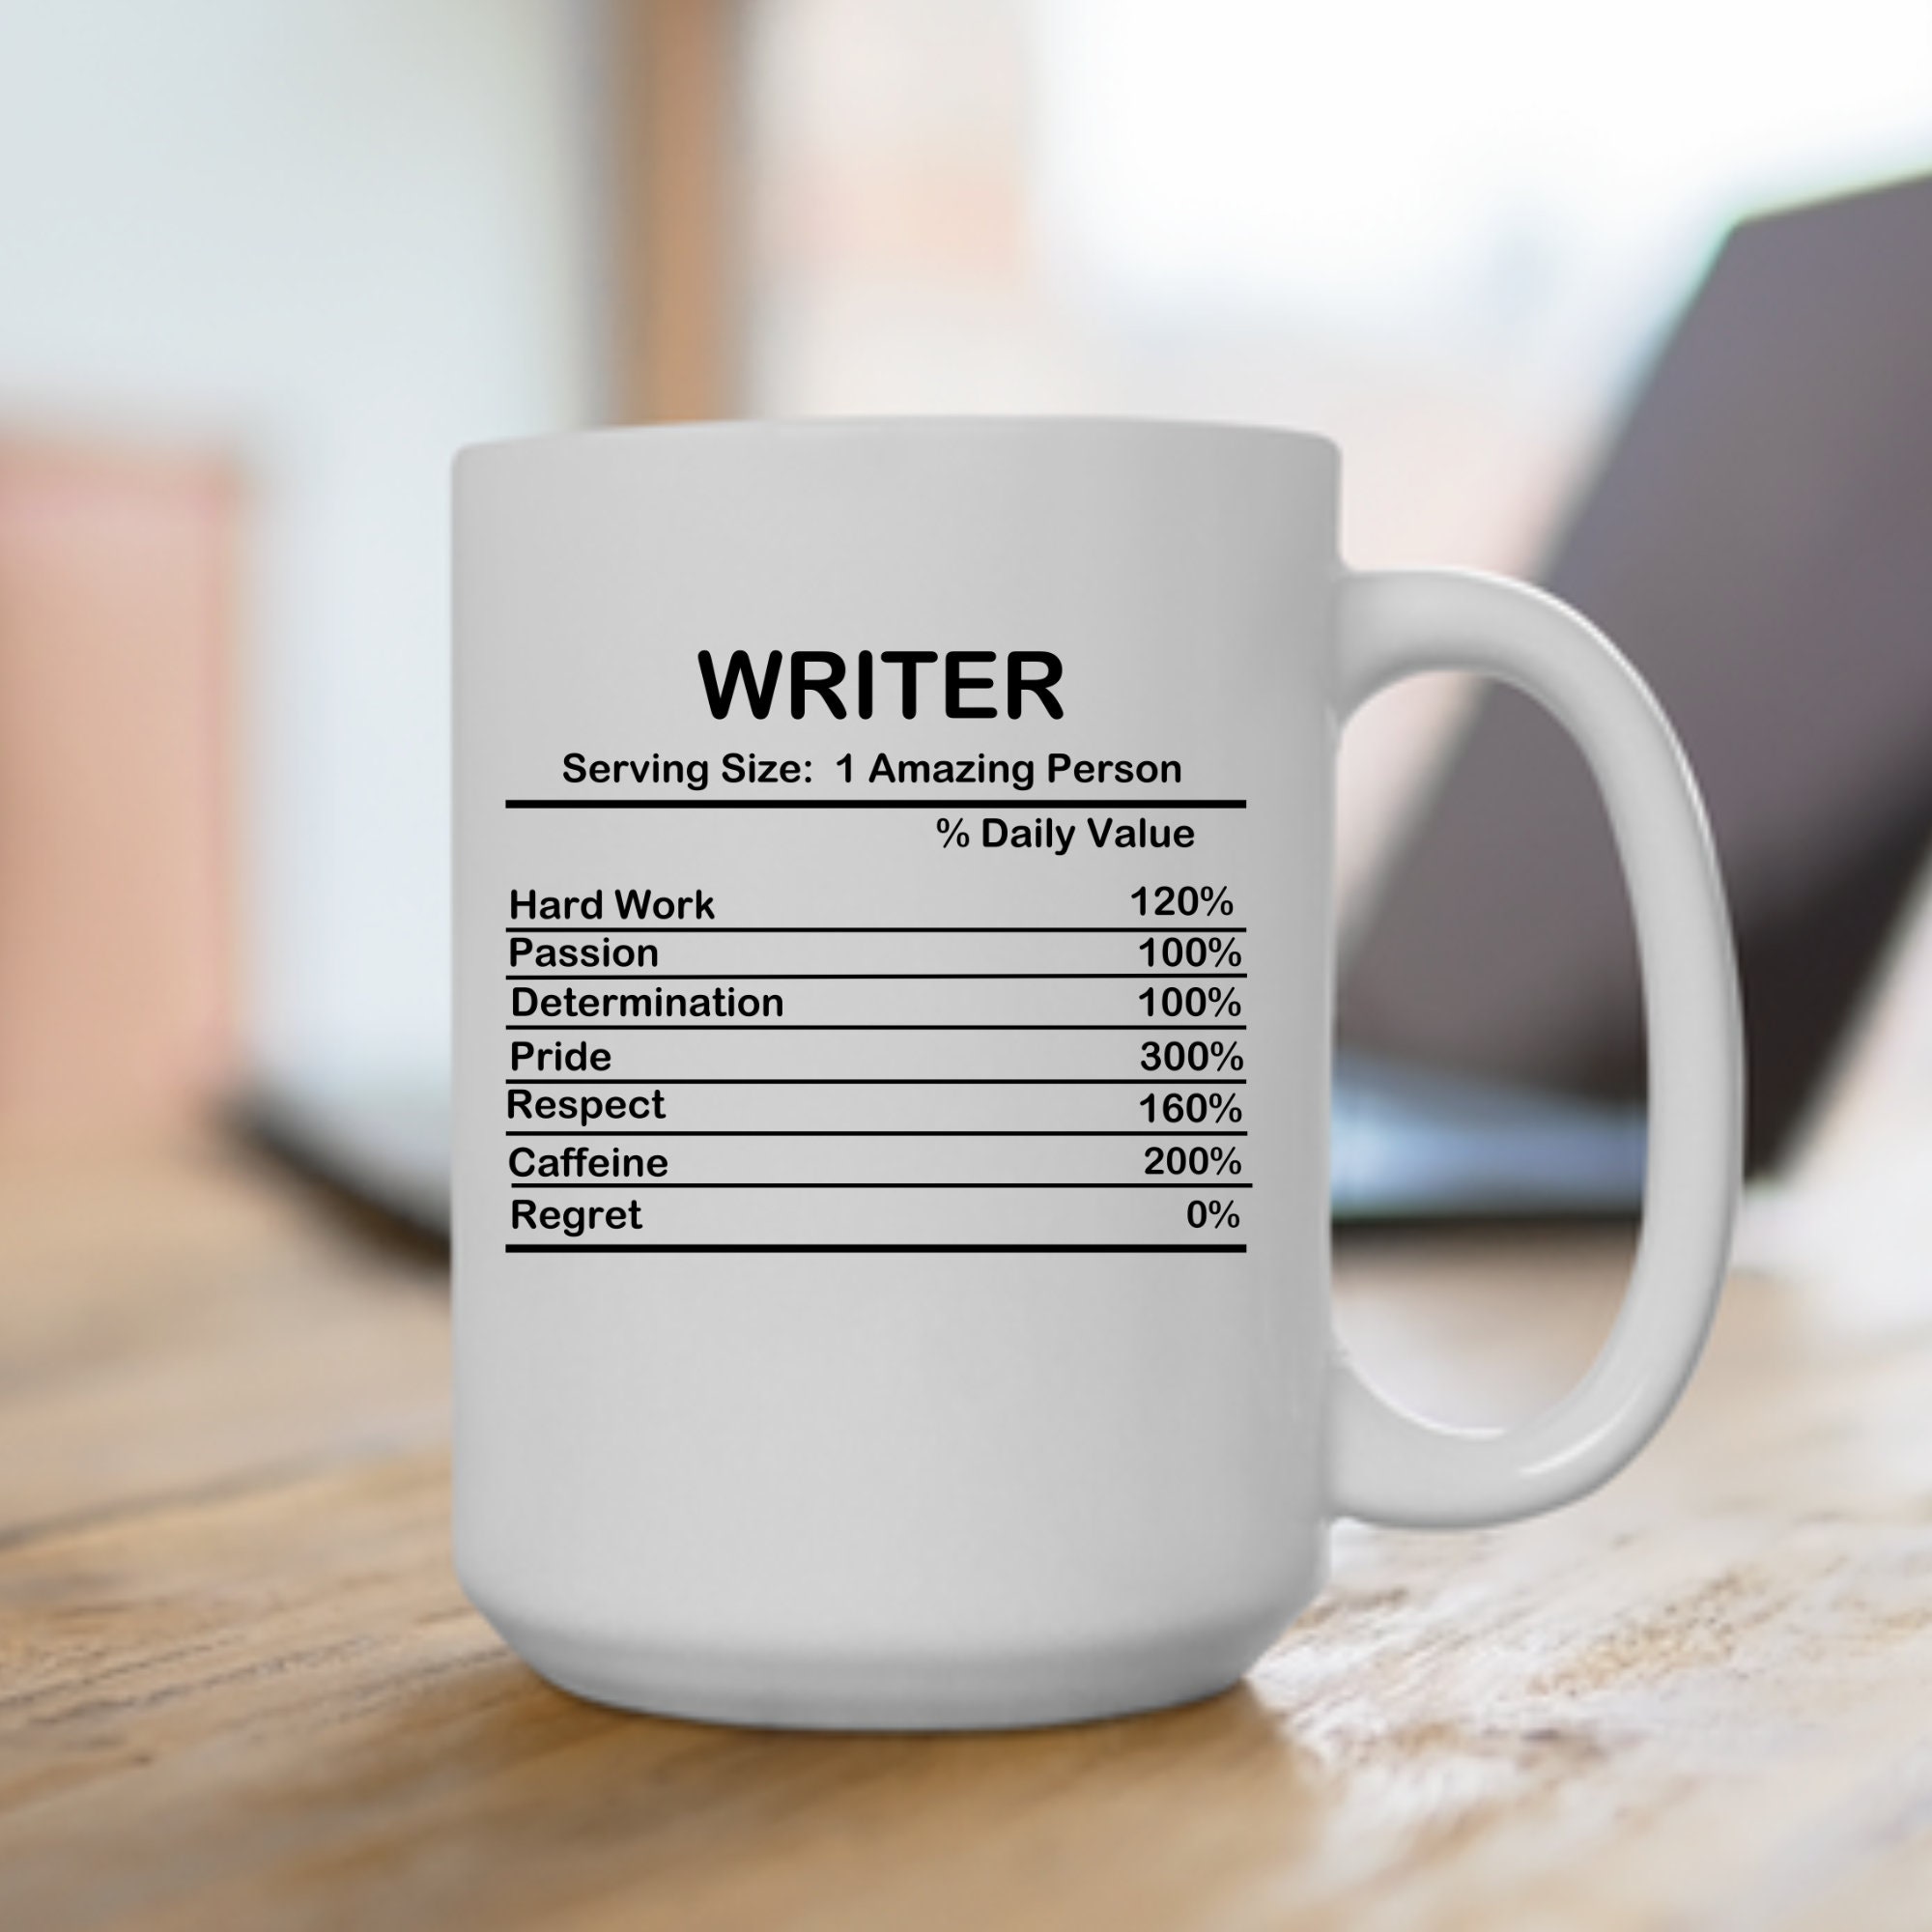 Gifts For Writers, Gifts For Authors, Presents For Writers, Literary Gifts,  Writing Theme, Book Lovers, Funny Mug, Novelty Mug